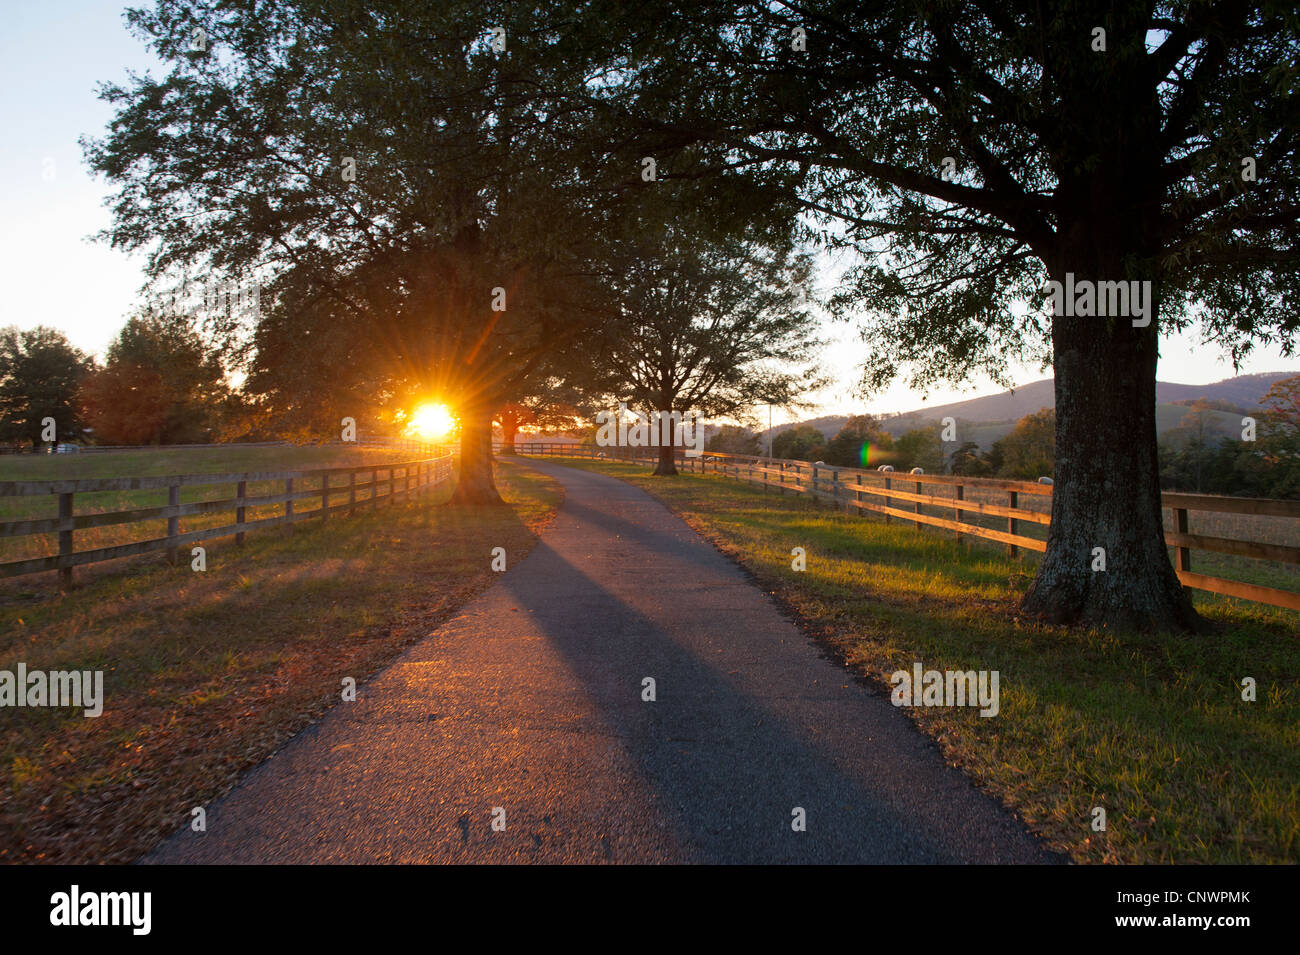 Driveway with fencing around pastures for livestock on a farm in autumn with seasonal color changes and sunset through the trees Stock Photo